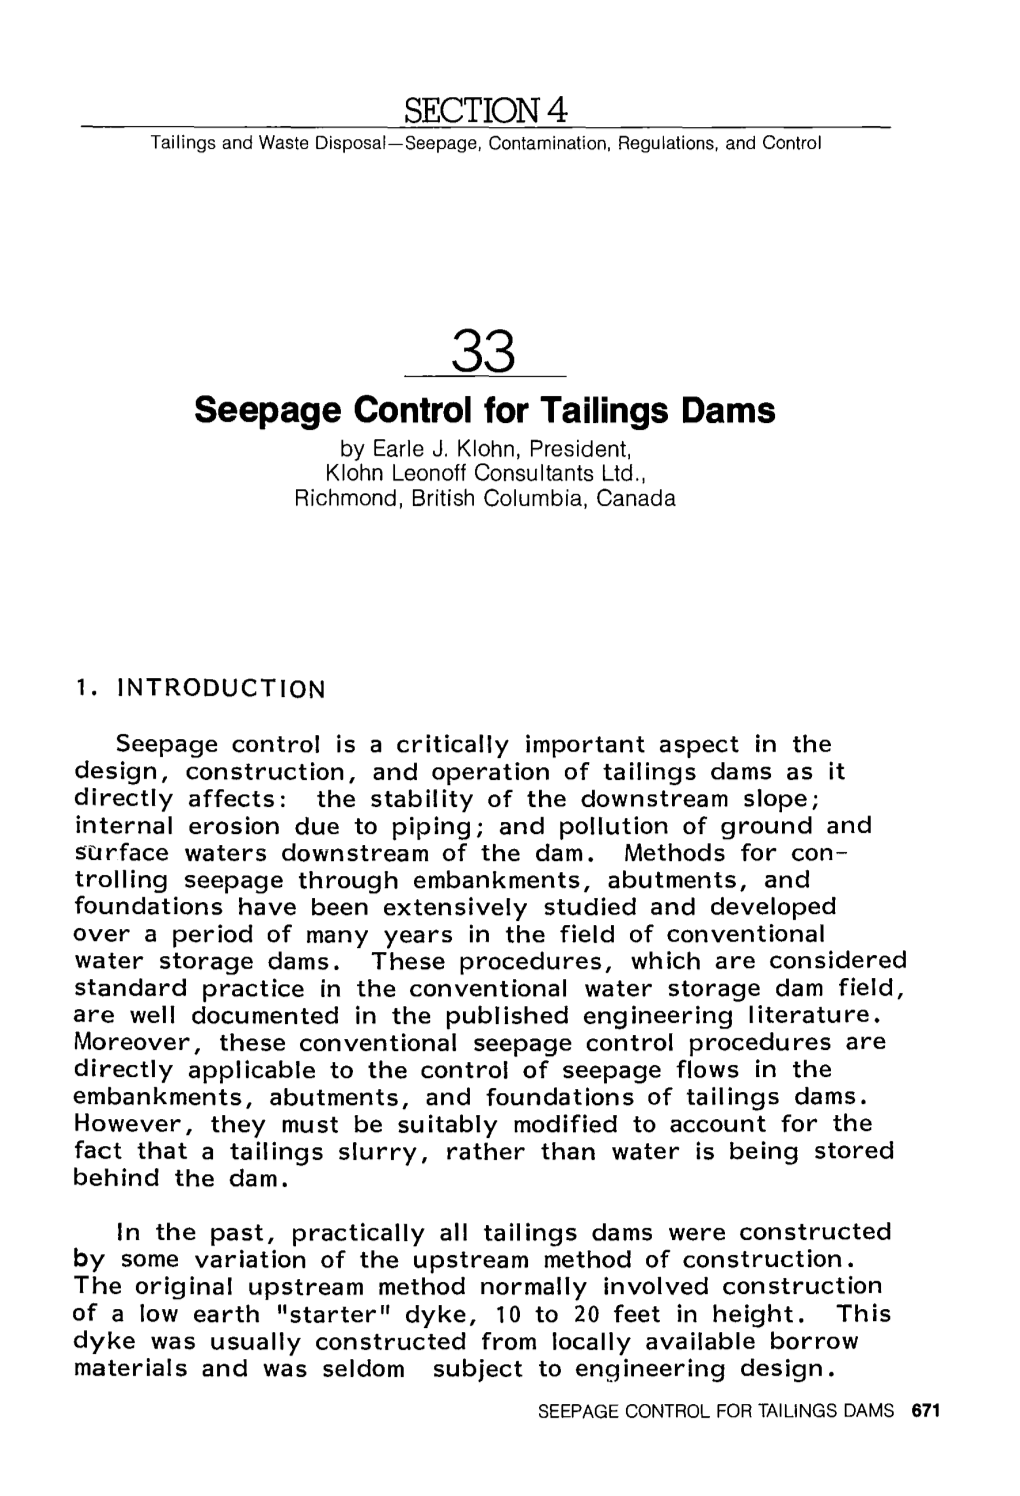 Seepage Control for Tailings Dams by Earle J